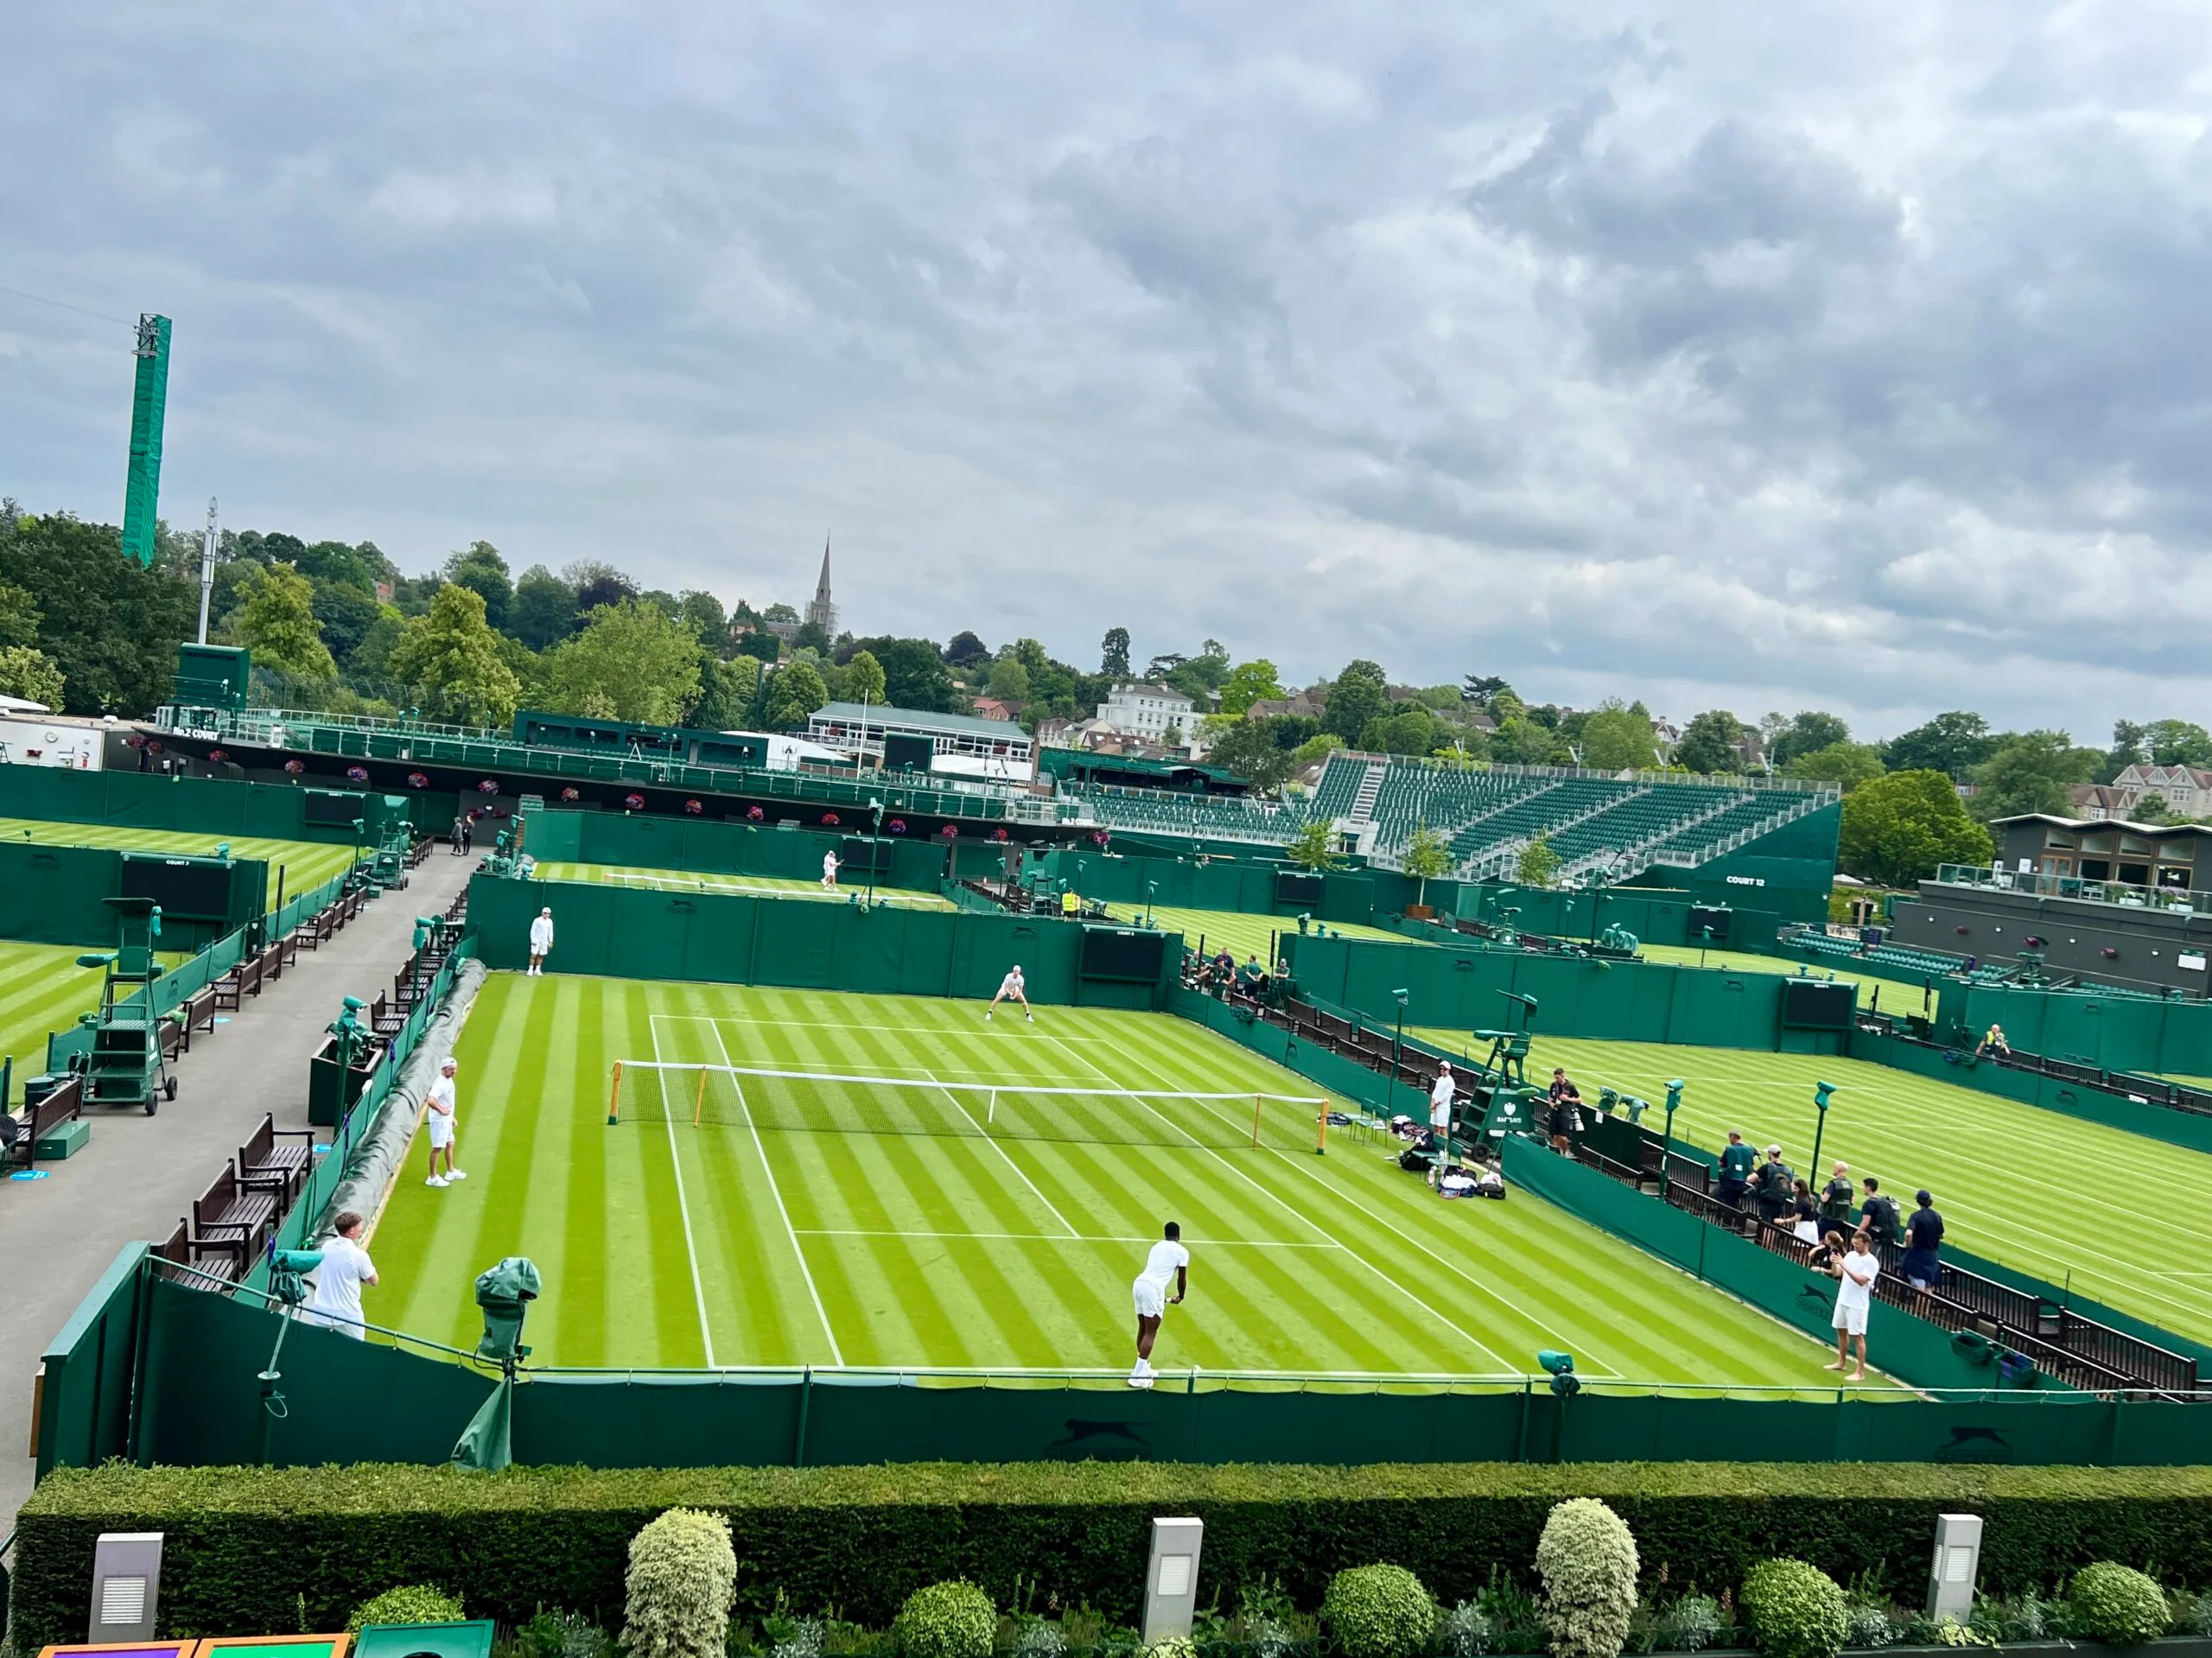 Wimbledon The Pinnacle of Tennis Tradition​